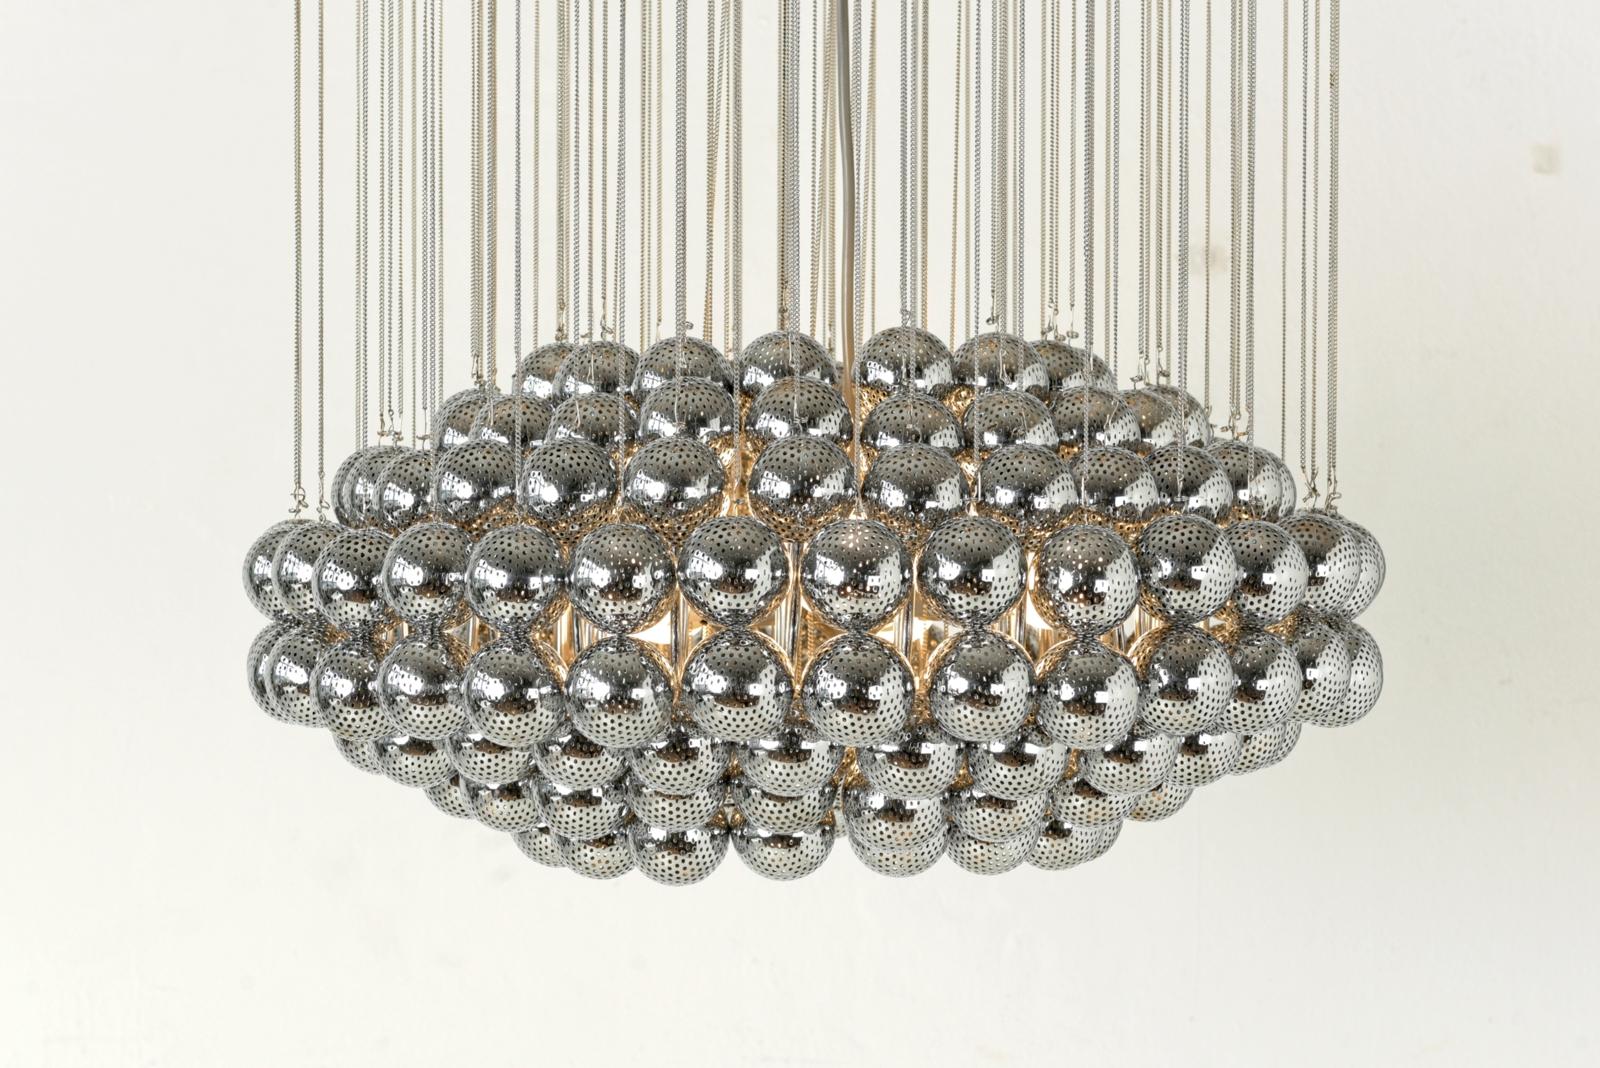 H 120 cm W 65 cm D 65 cm

Material: ceiling plate aluminum, 198 perforated, chrome-plated brass balls on chrome-plated chains, 6 burners E 27.

Condition: good

Special features: with few signs of use. We are offering a highly unusual lighting